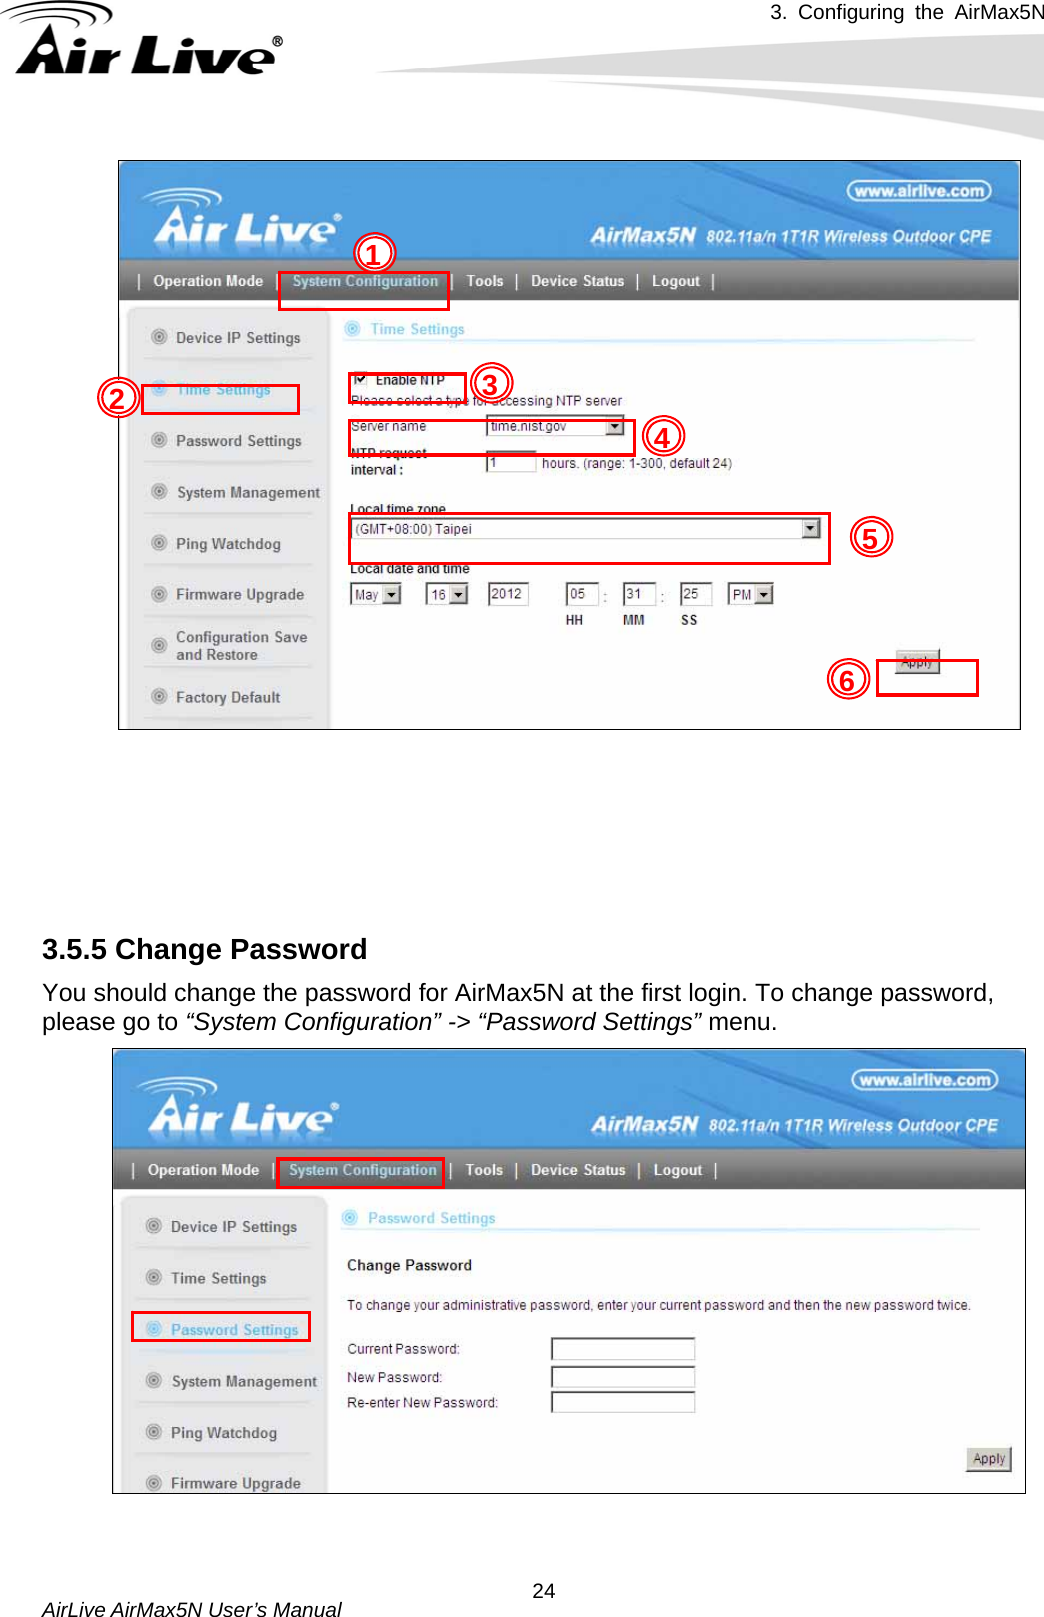 3. Configuring the AirMax5N   AirLive AirMax5N User’s Manual  241       3.5.5 Change Password You should change the password for AirMax5N at the first login. To change password, please go to “System Configuration” -&gt; “Password Settings” menu.    5 32  46 